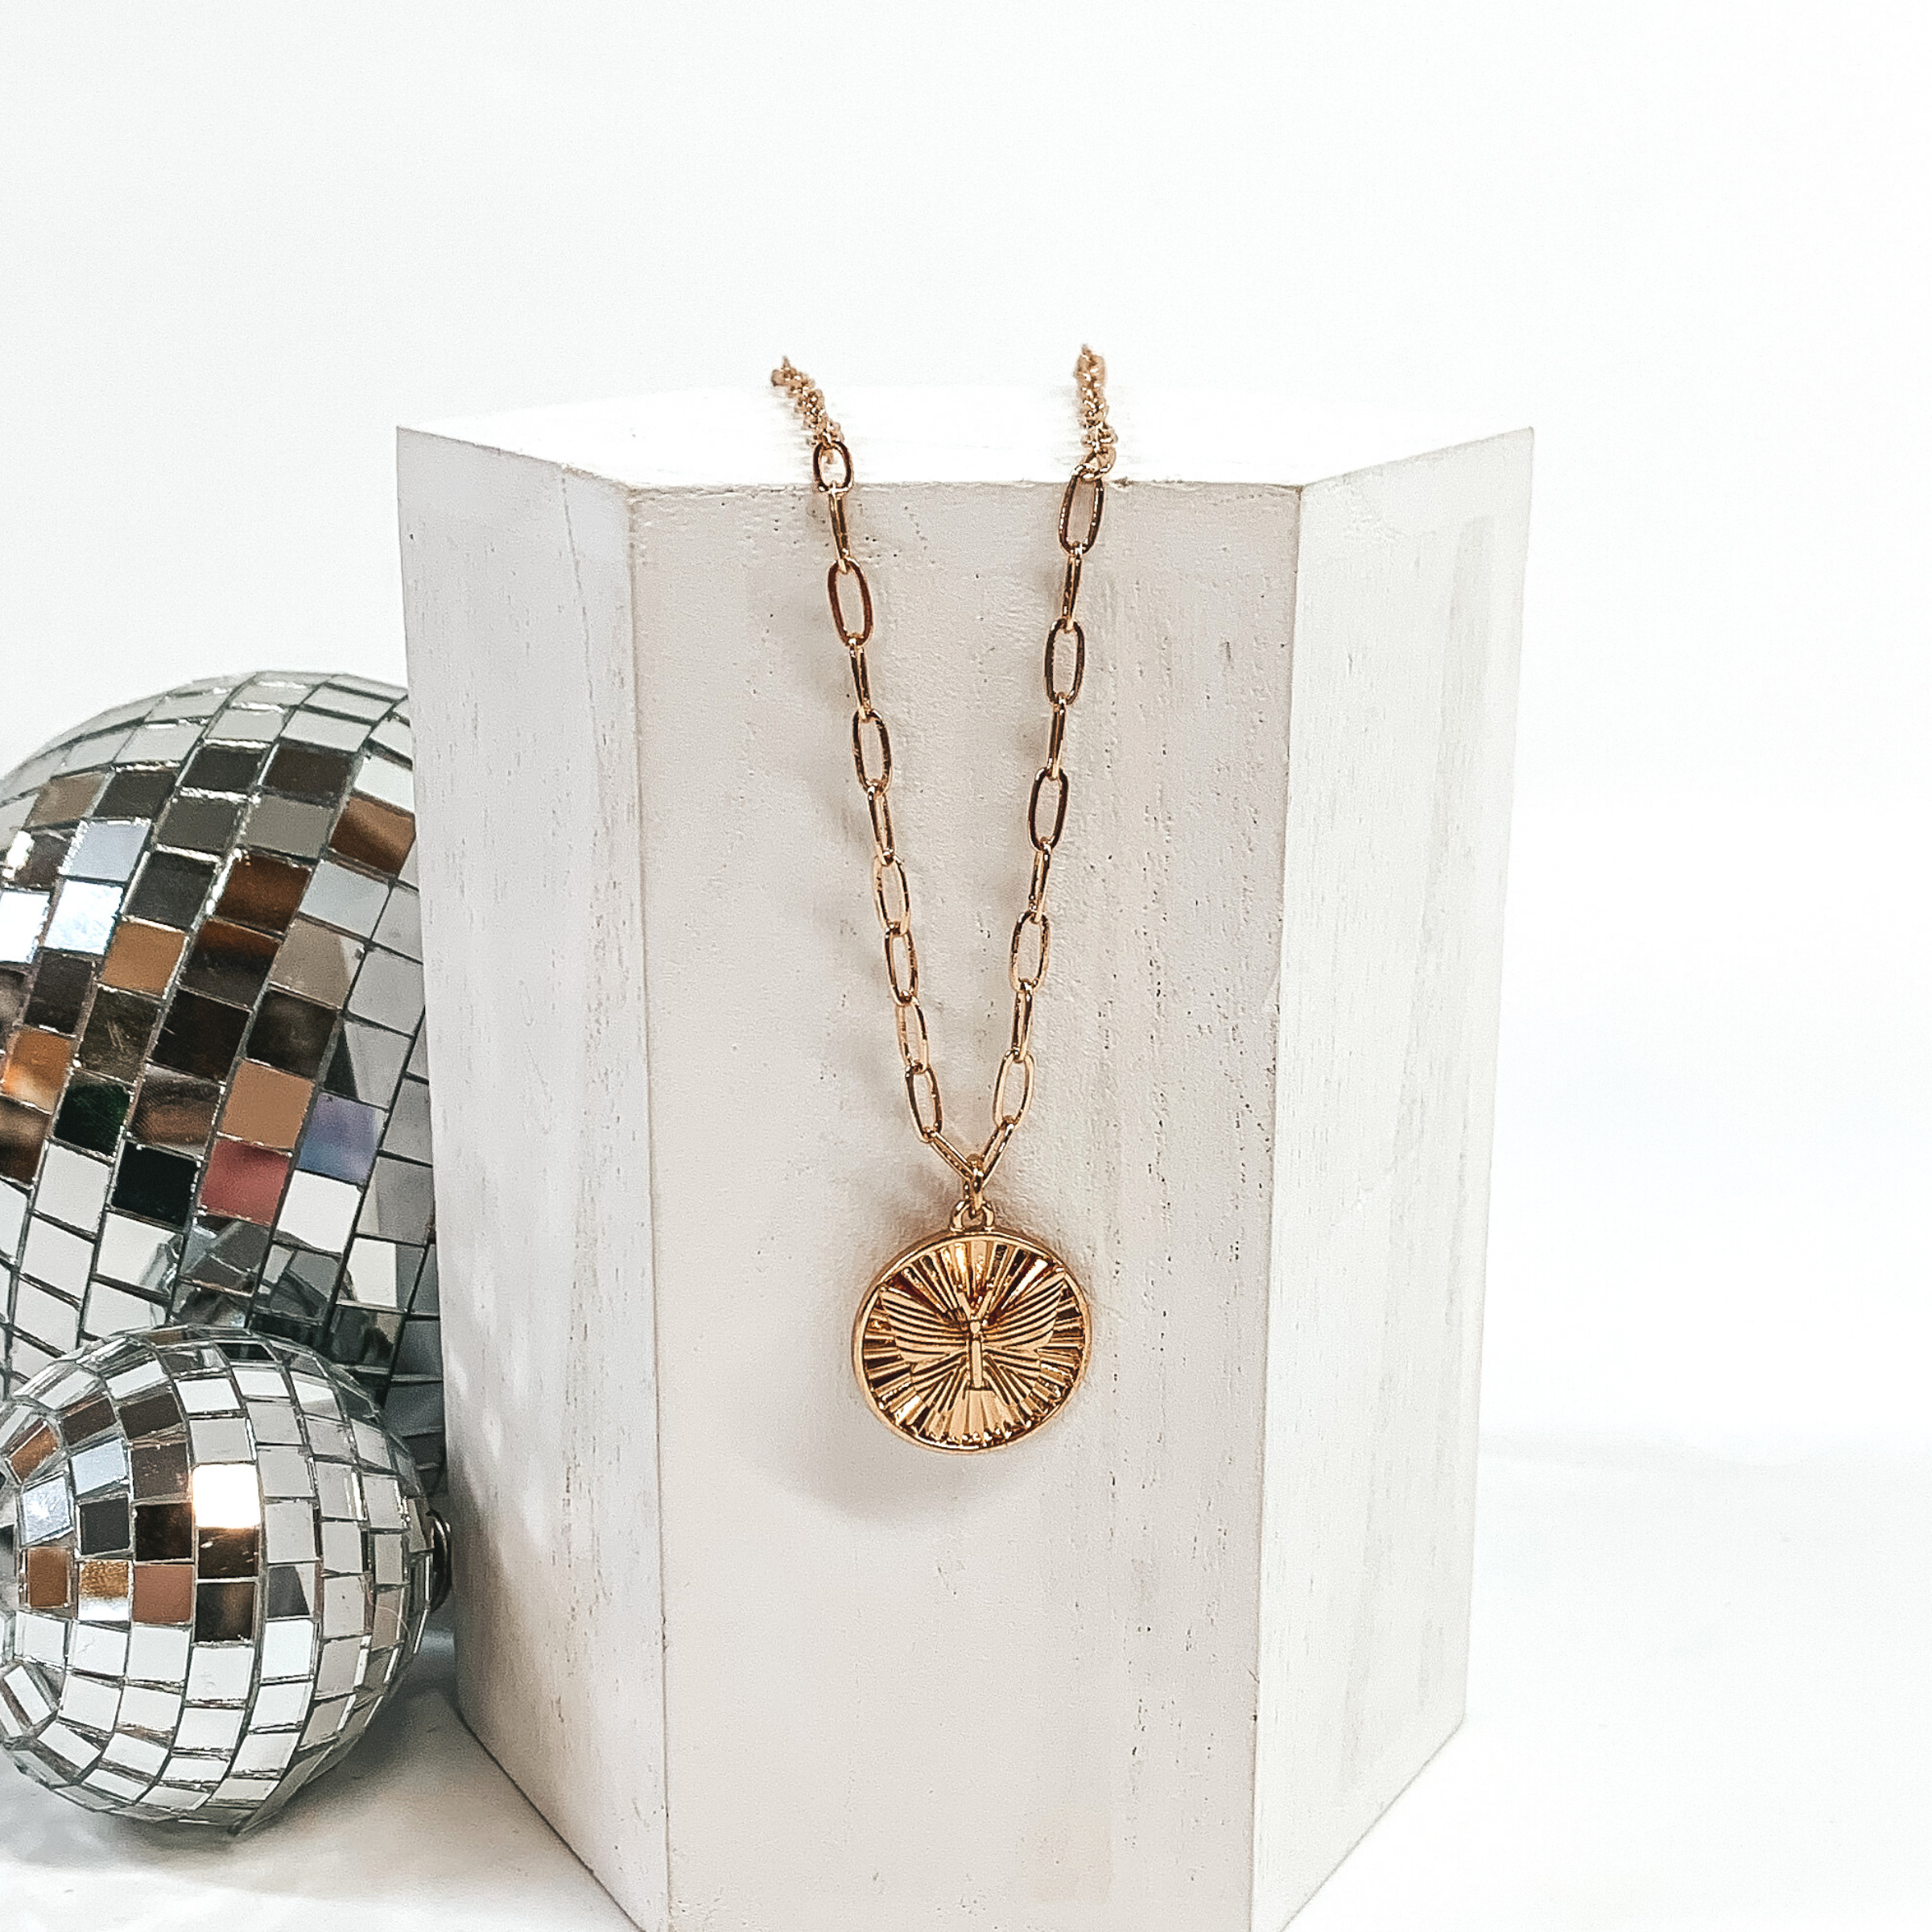 This is a gold necklace with a shell textured circle pendant and a butterfly charm on the front of the circle pendant. This necklace is pictured laying on a white block and on a white background with disco balls on the left side of the block.